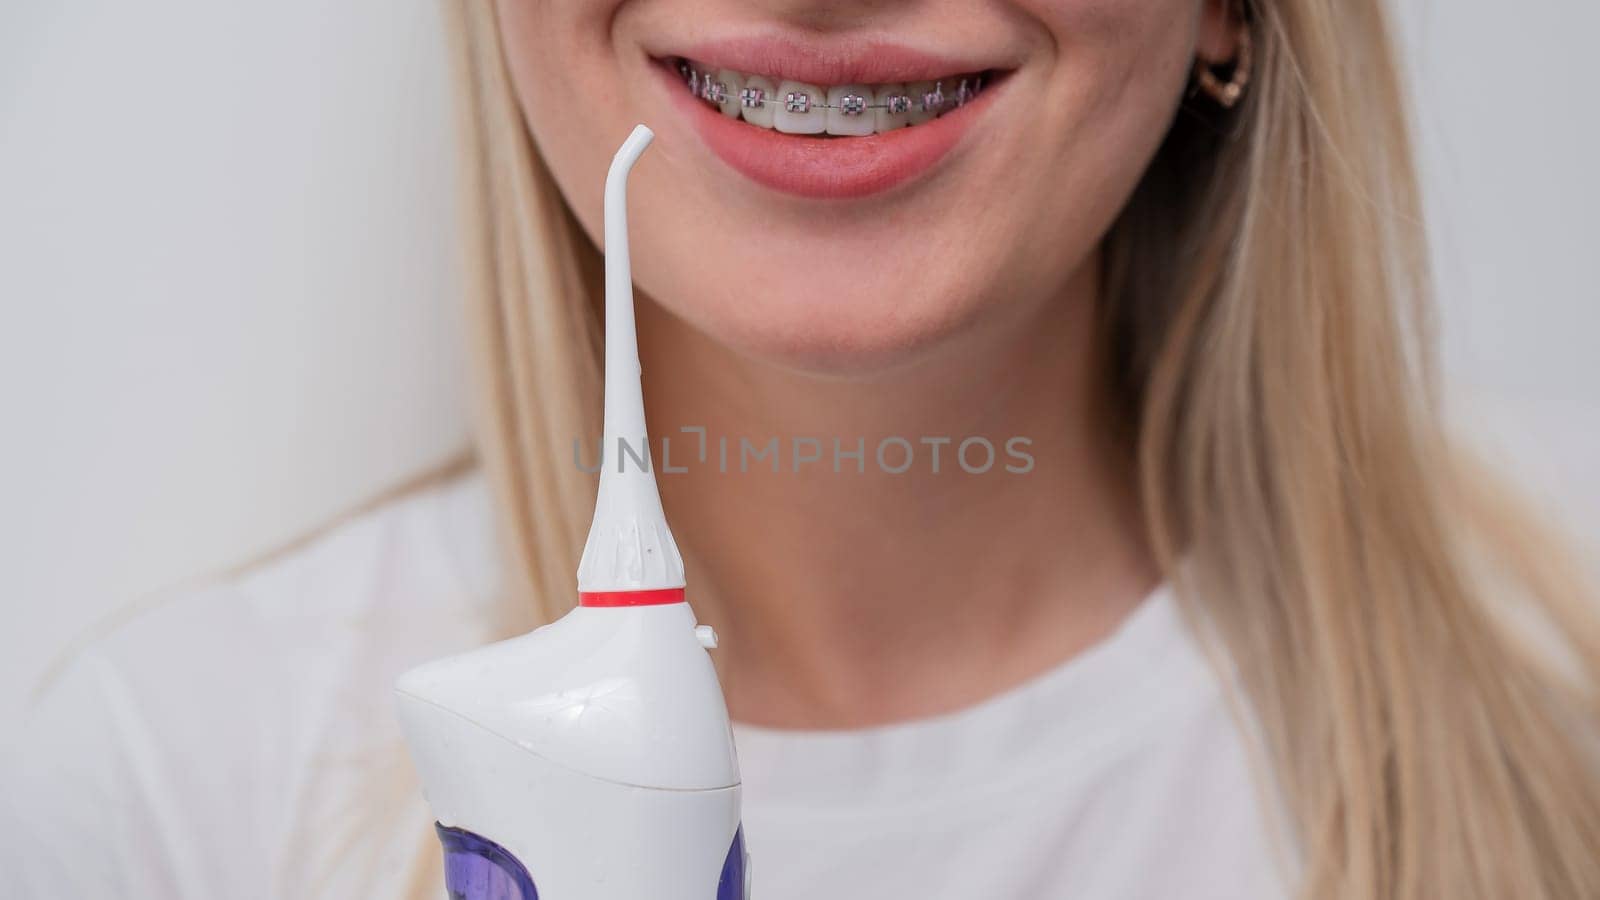 Cropped portrait of a caucasian woman with braces on her teeth holding an irrigator